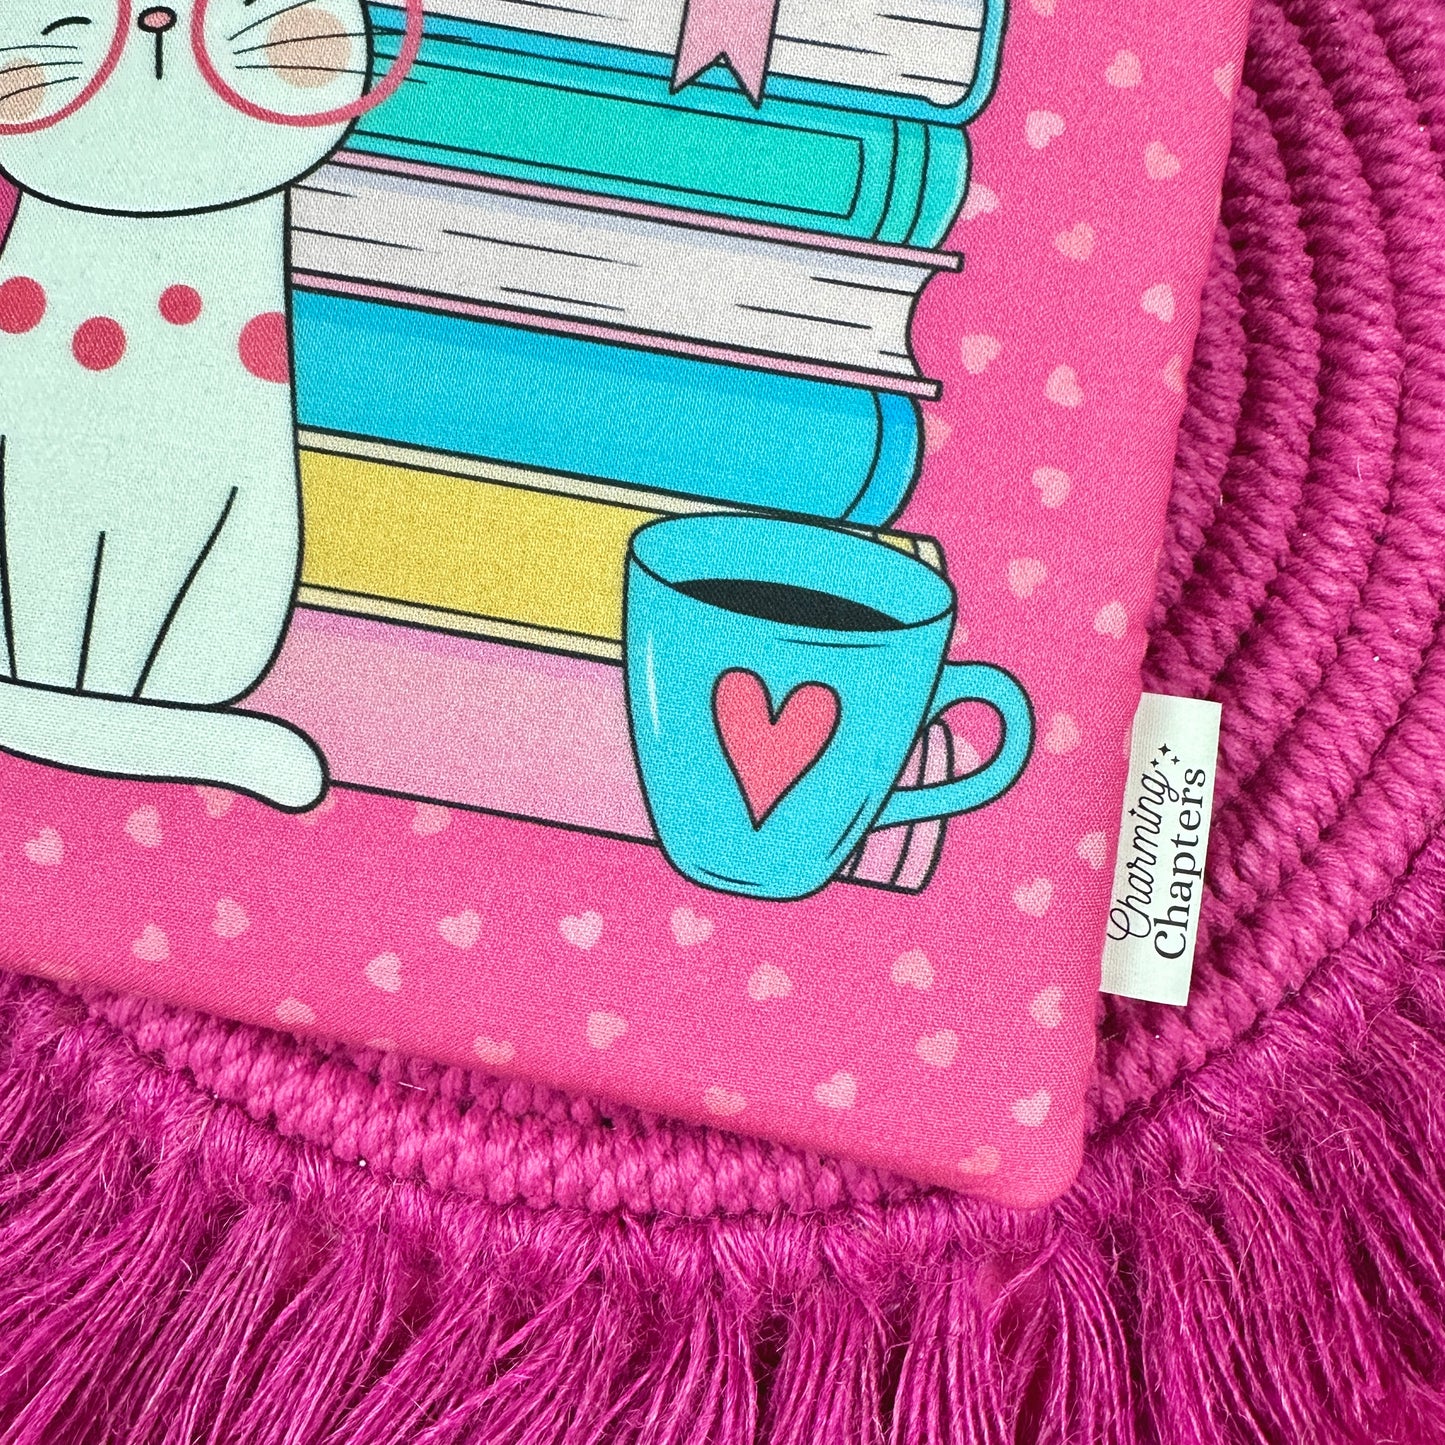 Cat Lover Book Sleeve